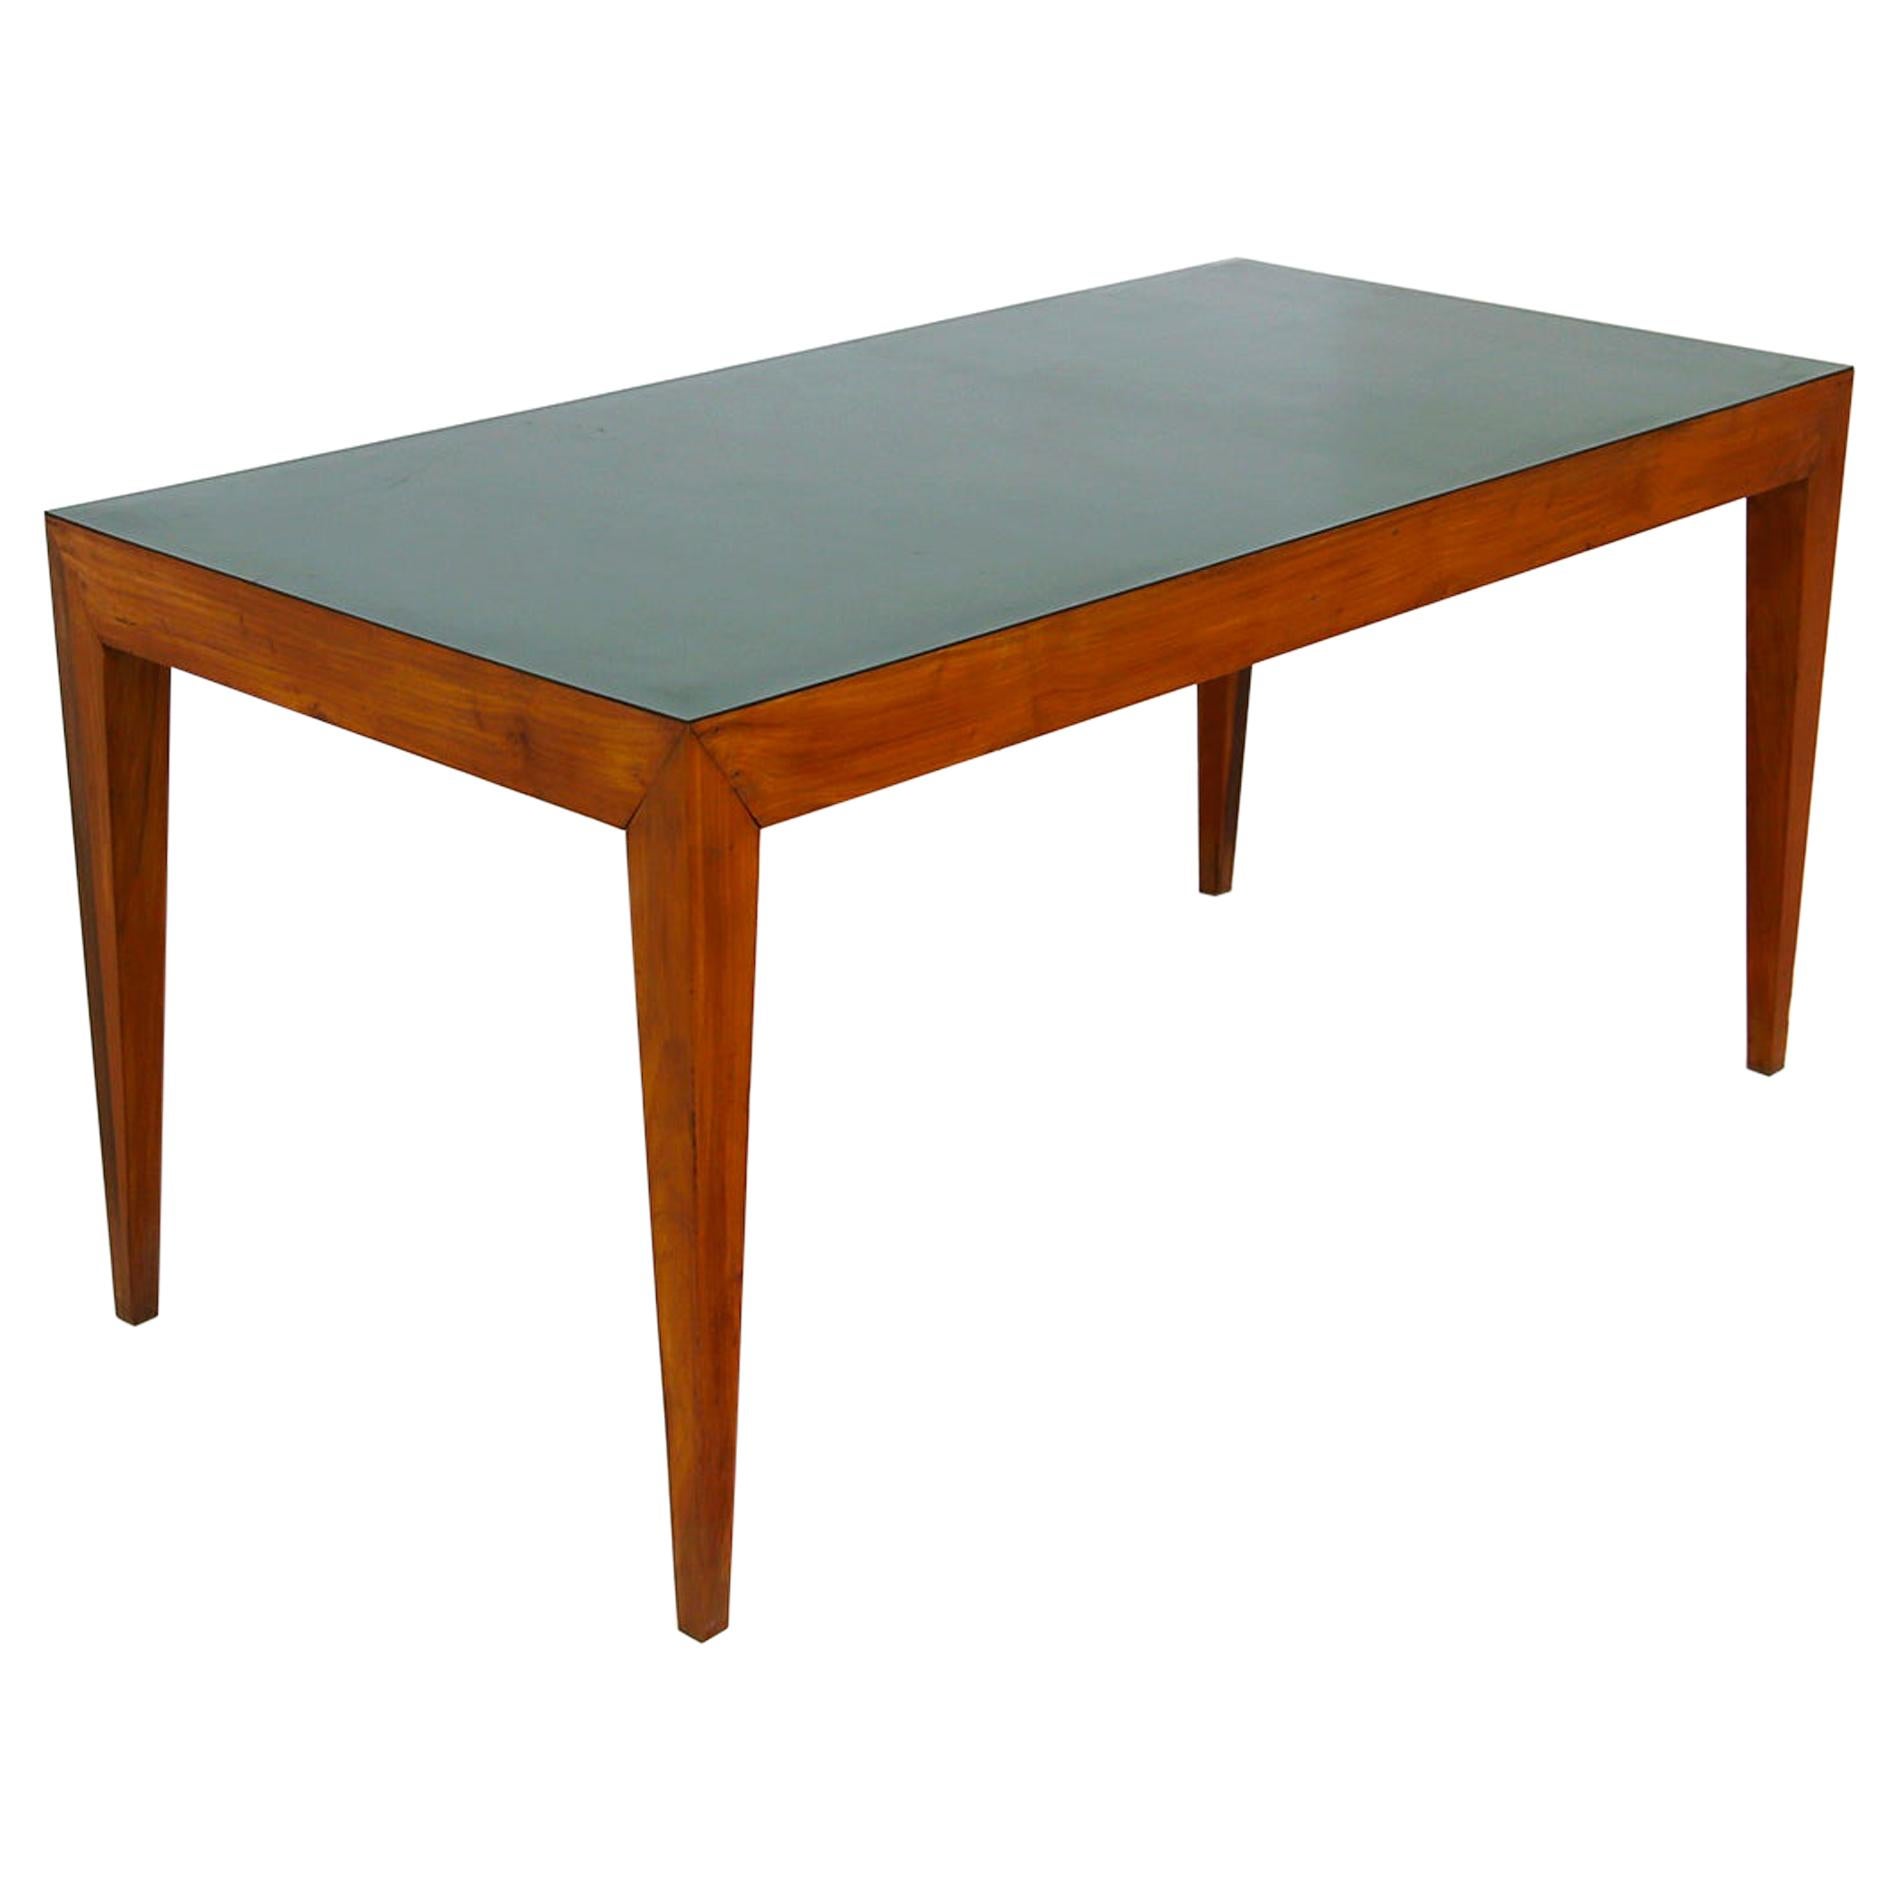 Dining Table Attributed to Gio Ponti in Walnut and Green Formica, 1950s